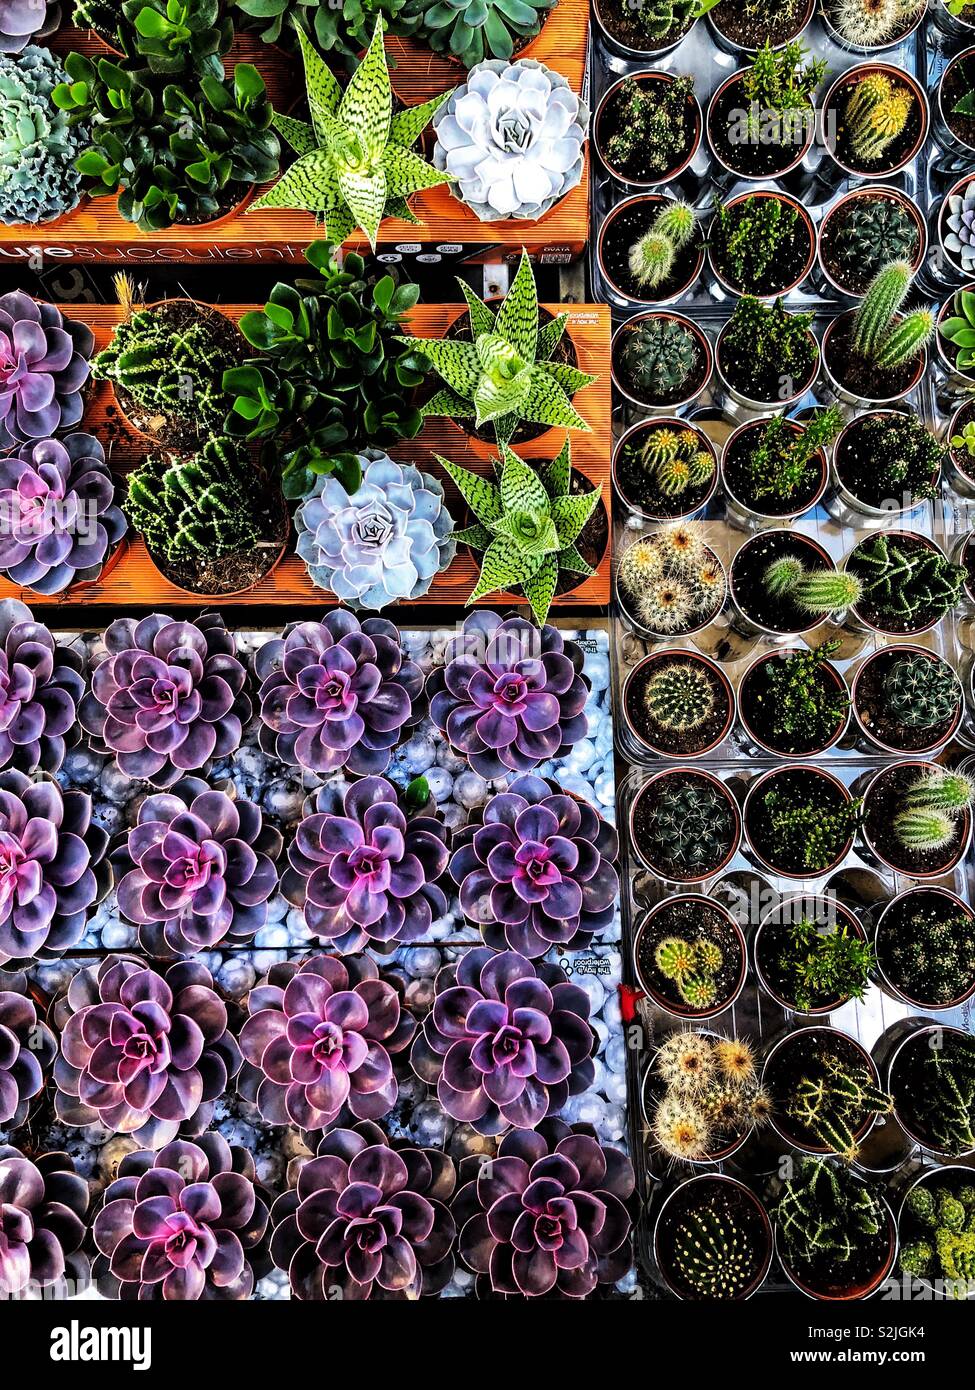 A view from above of many trays of colorful succulent plants Stock Photo